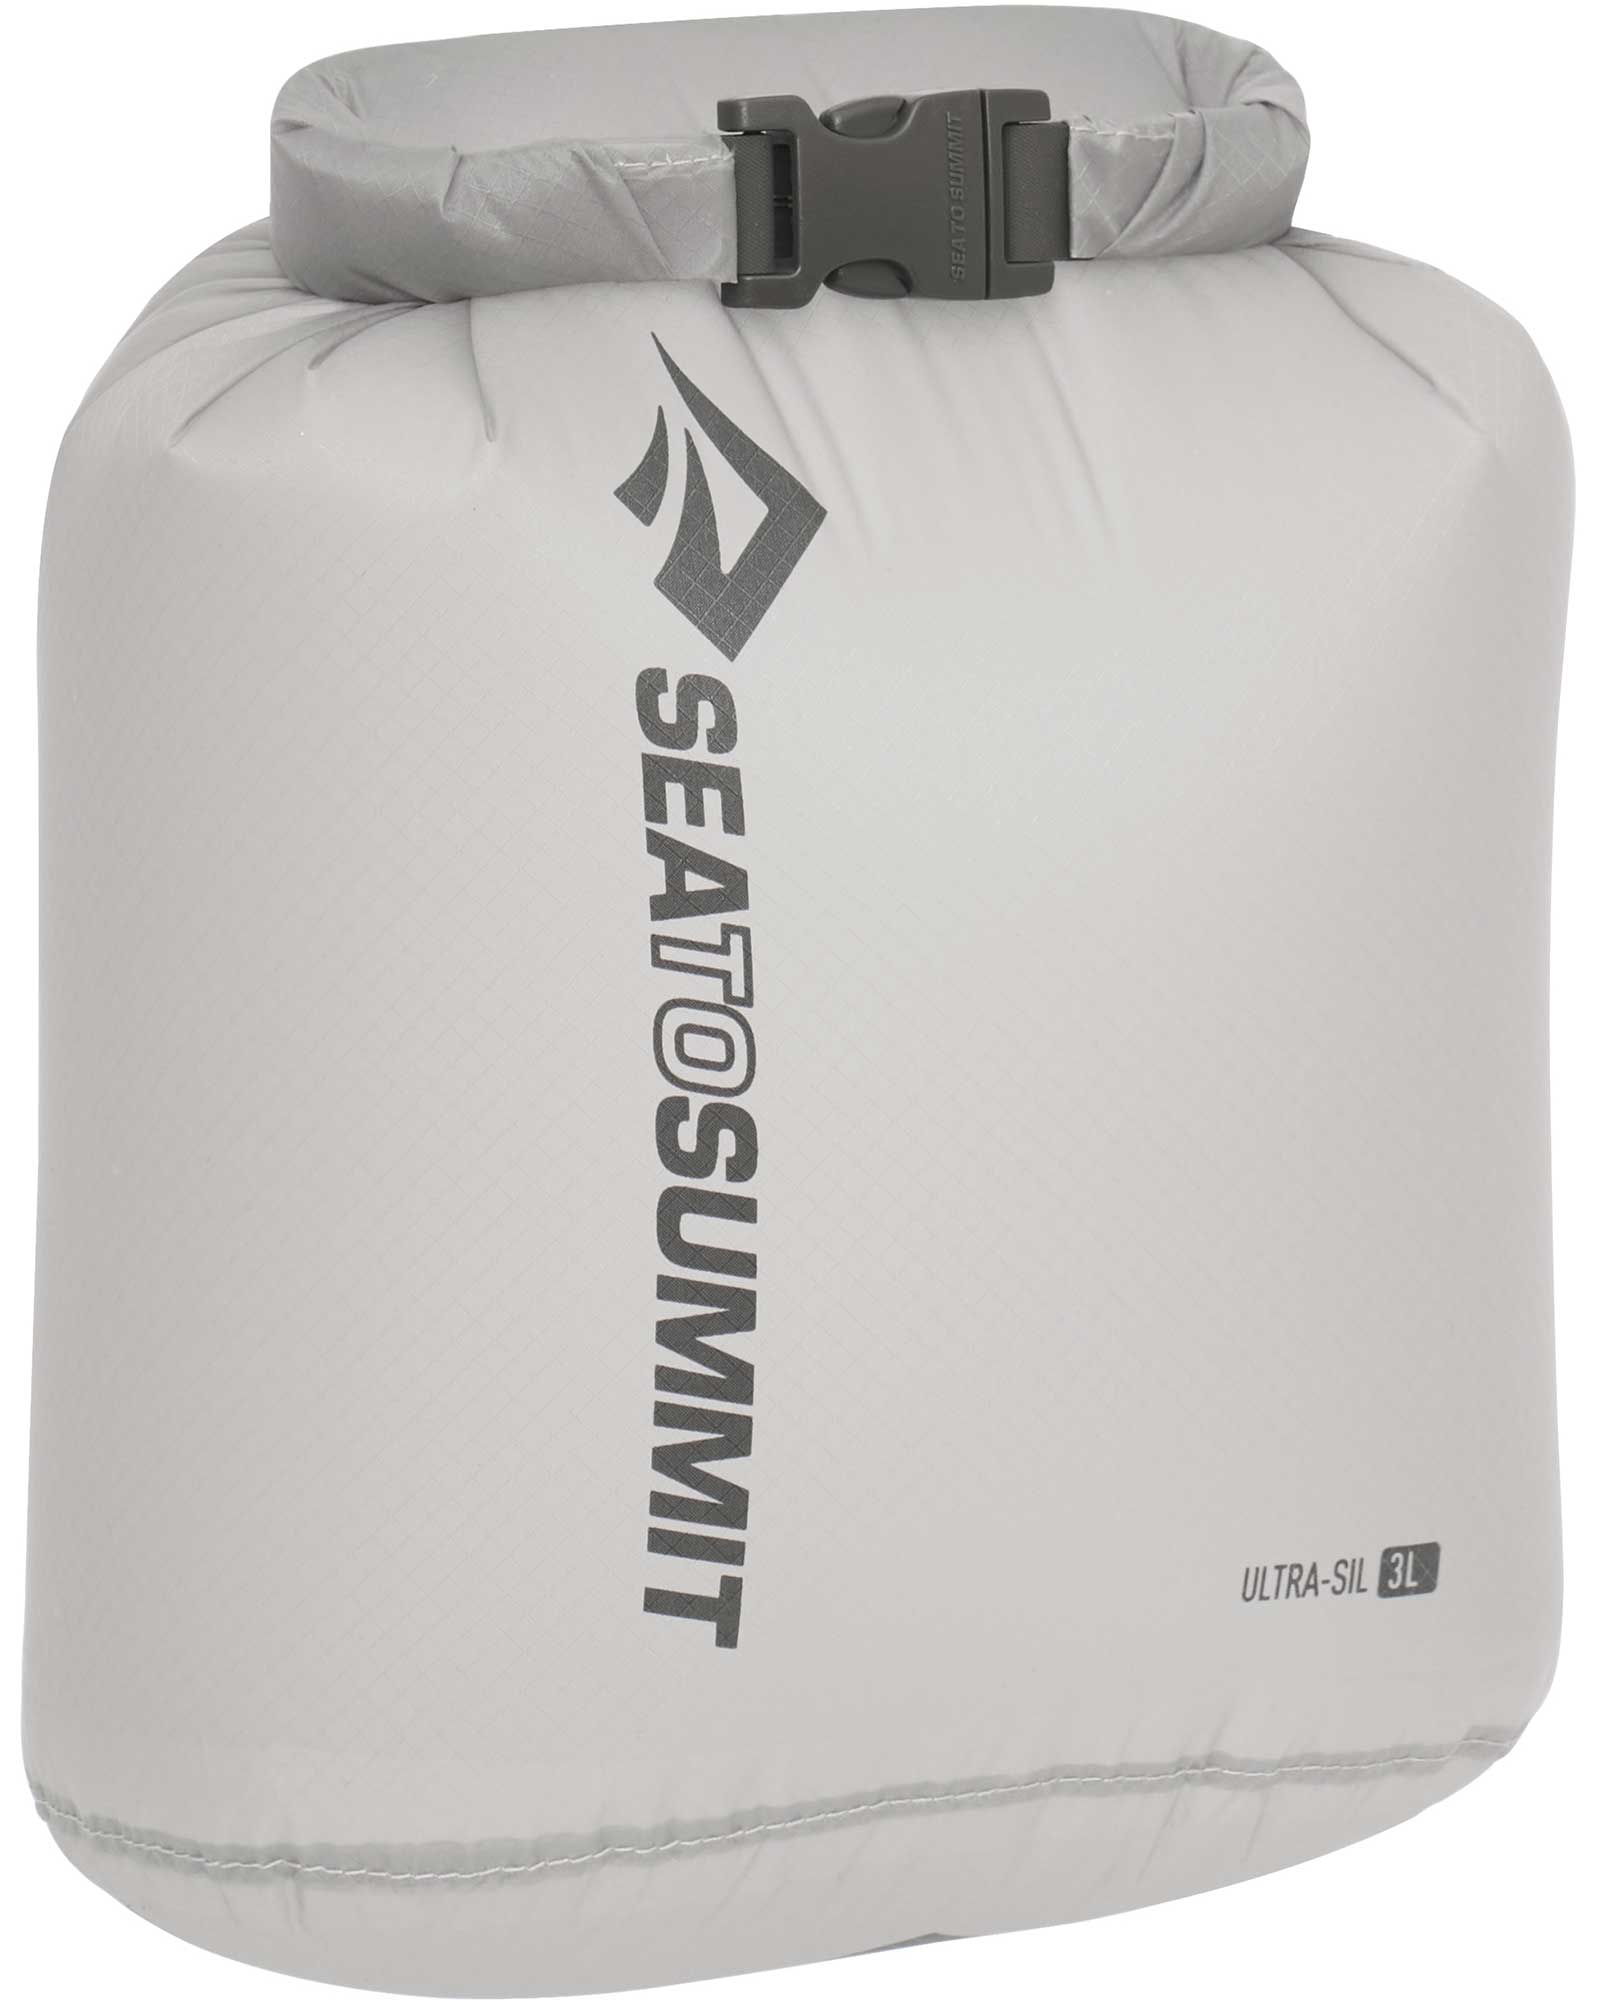 Sea to Summit Ultra Sil 3L Dry Bag - High Rise